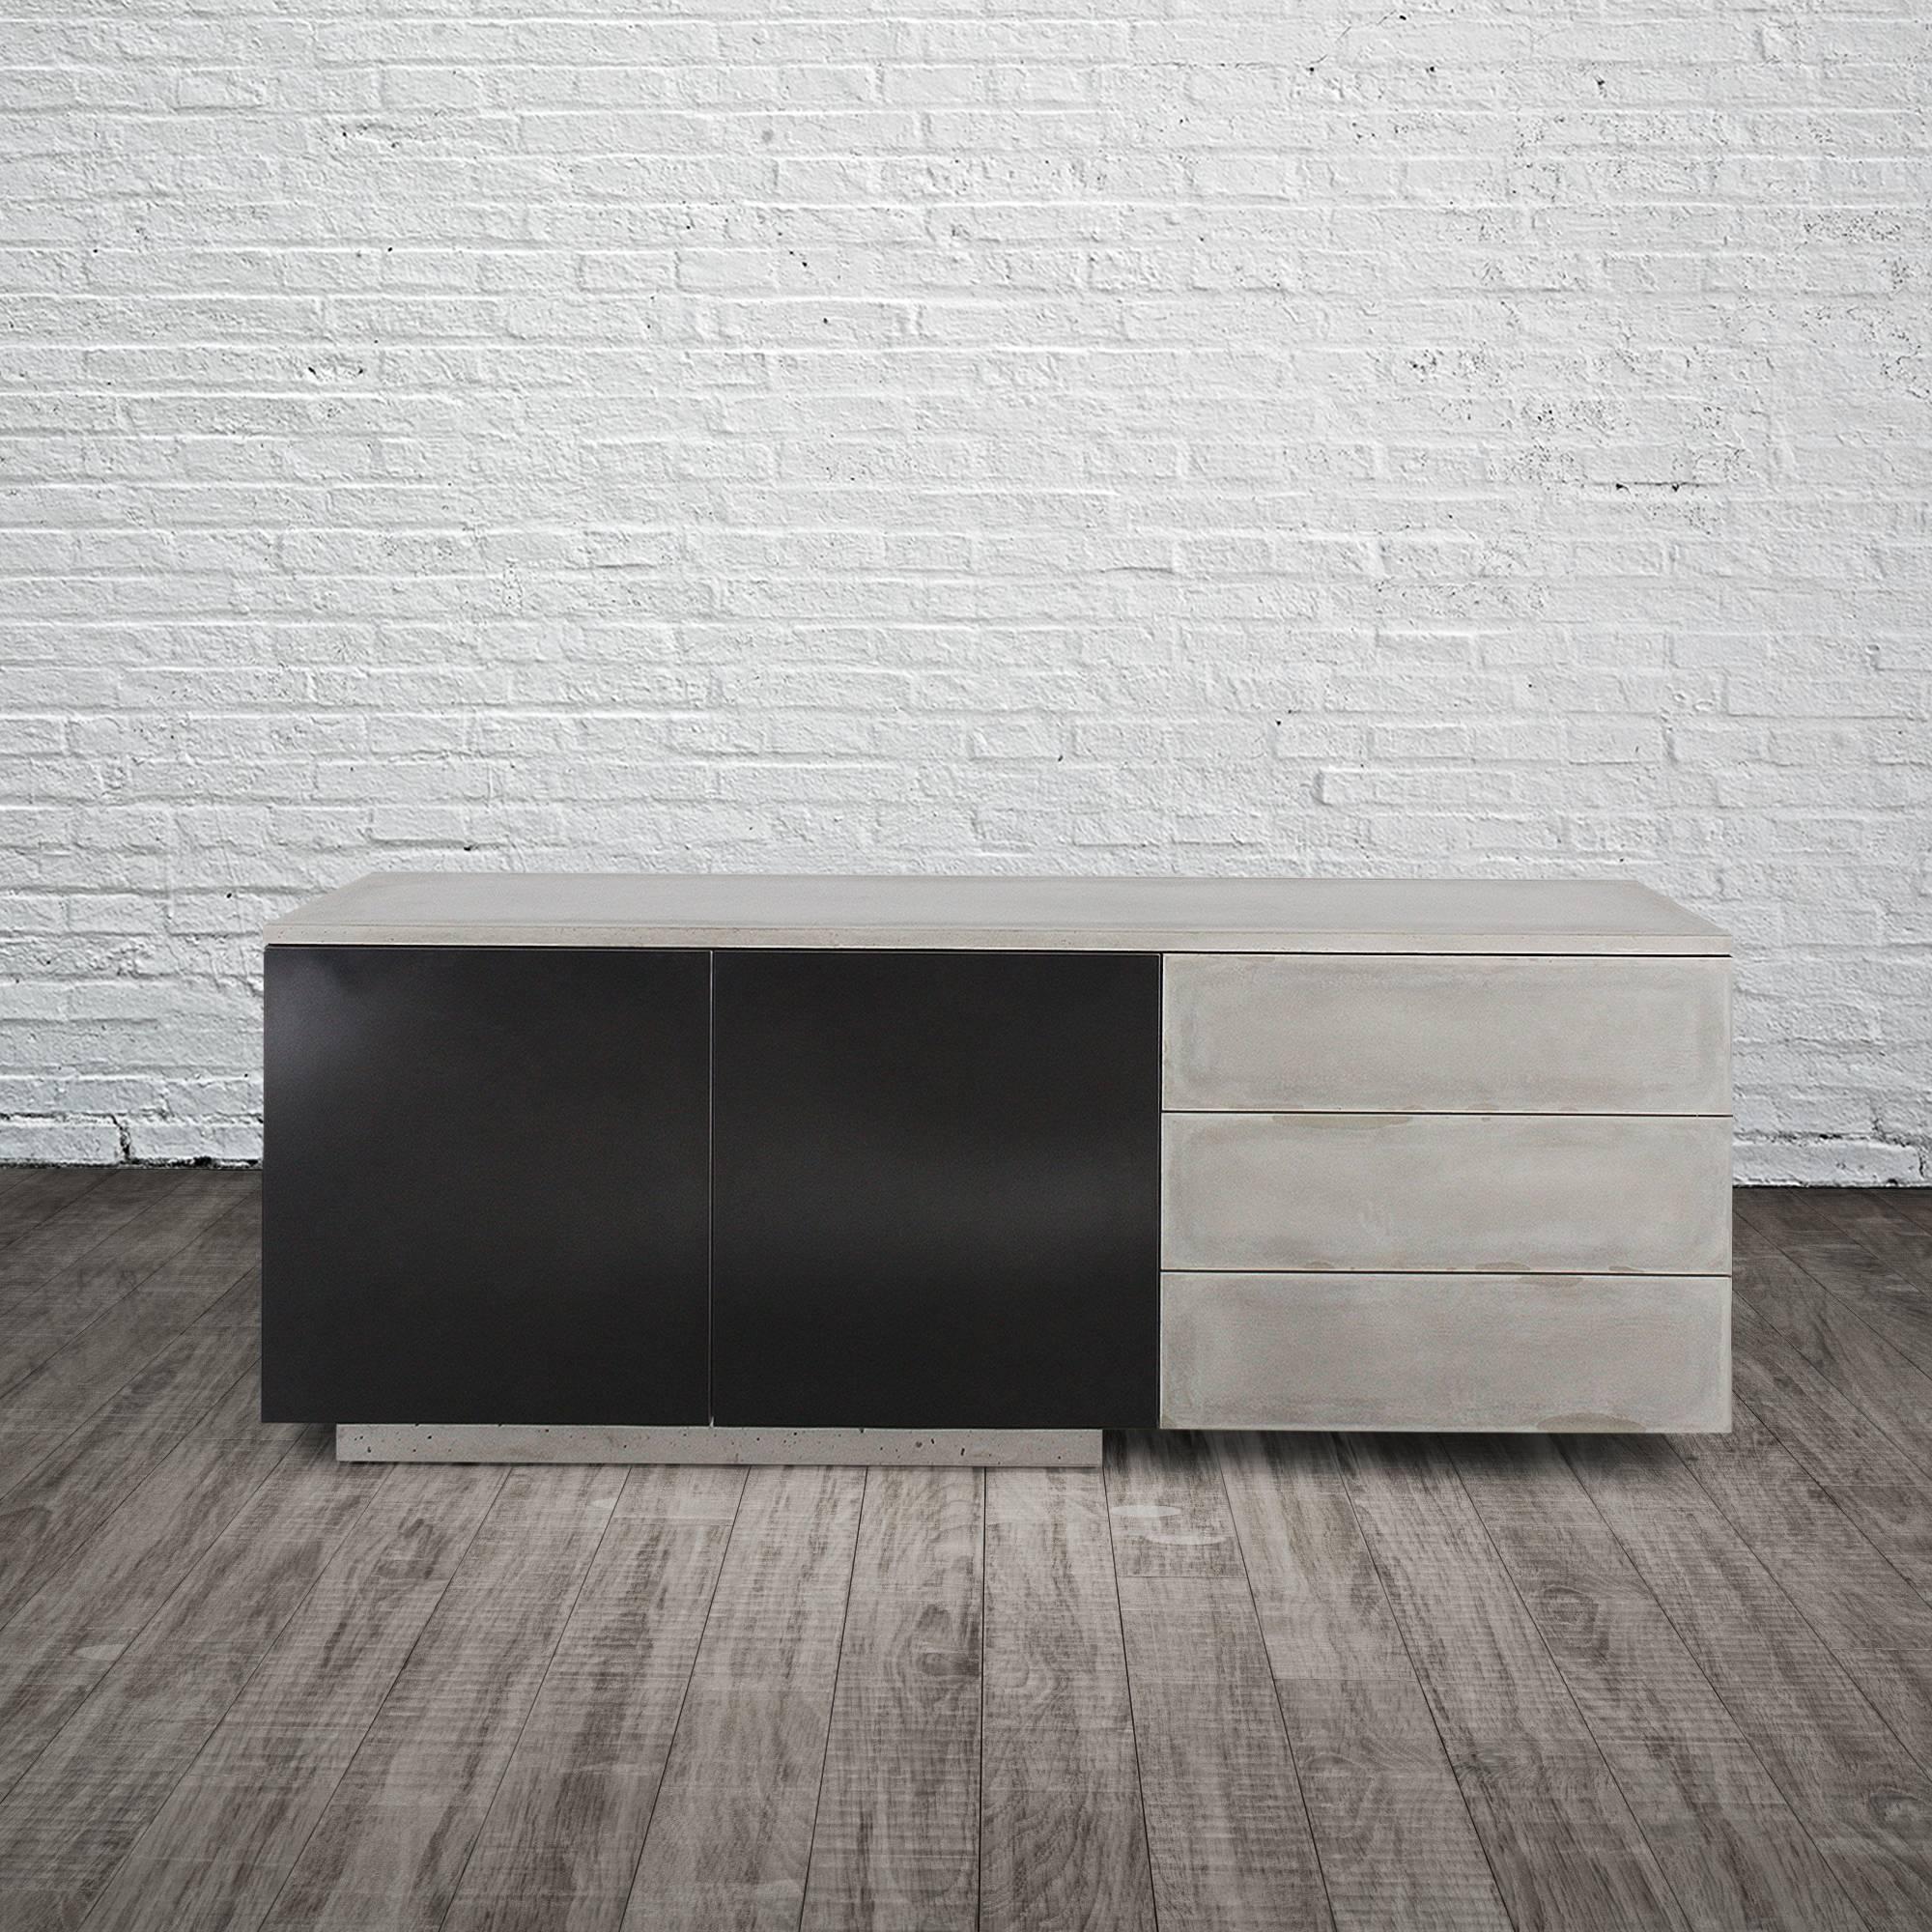 C-210 seamlessly integrates three elemental materials, concrete, steel and wood. The counter-top as well as the drawer faces are all cast concrete. The piece is fully wrapped and fully finished (front and back) with hand-blackened steel that is